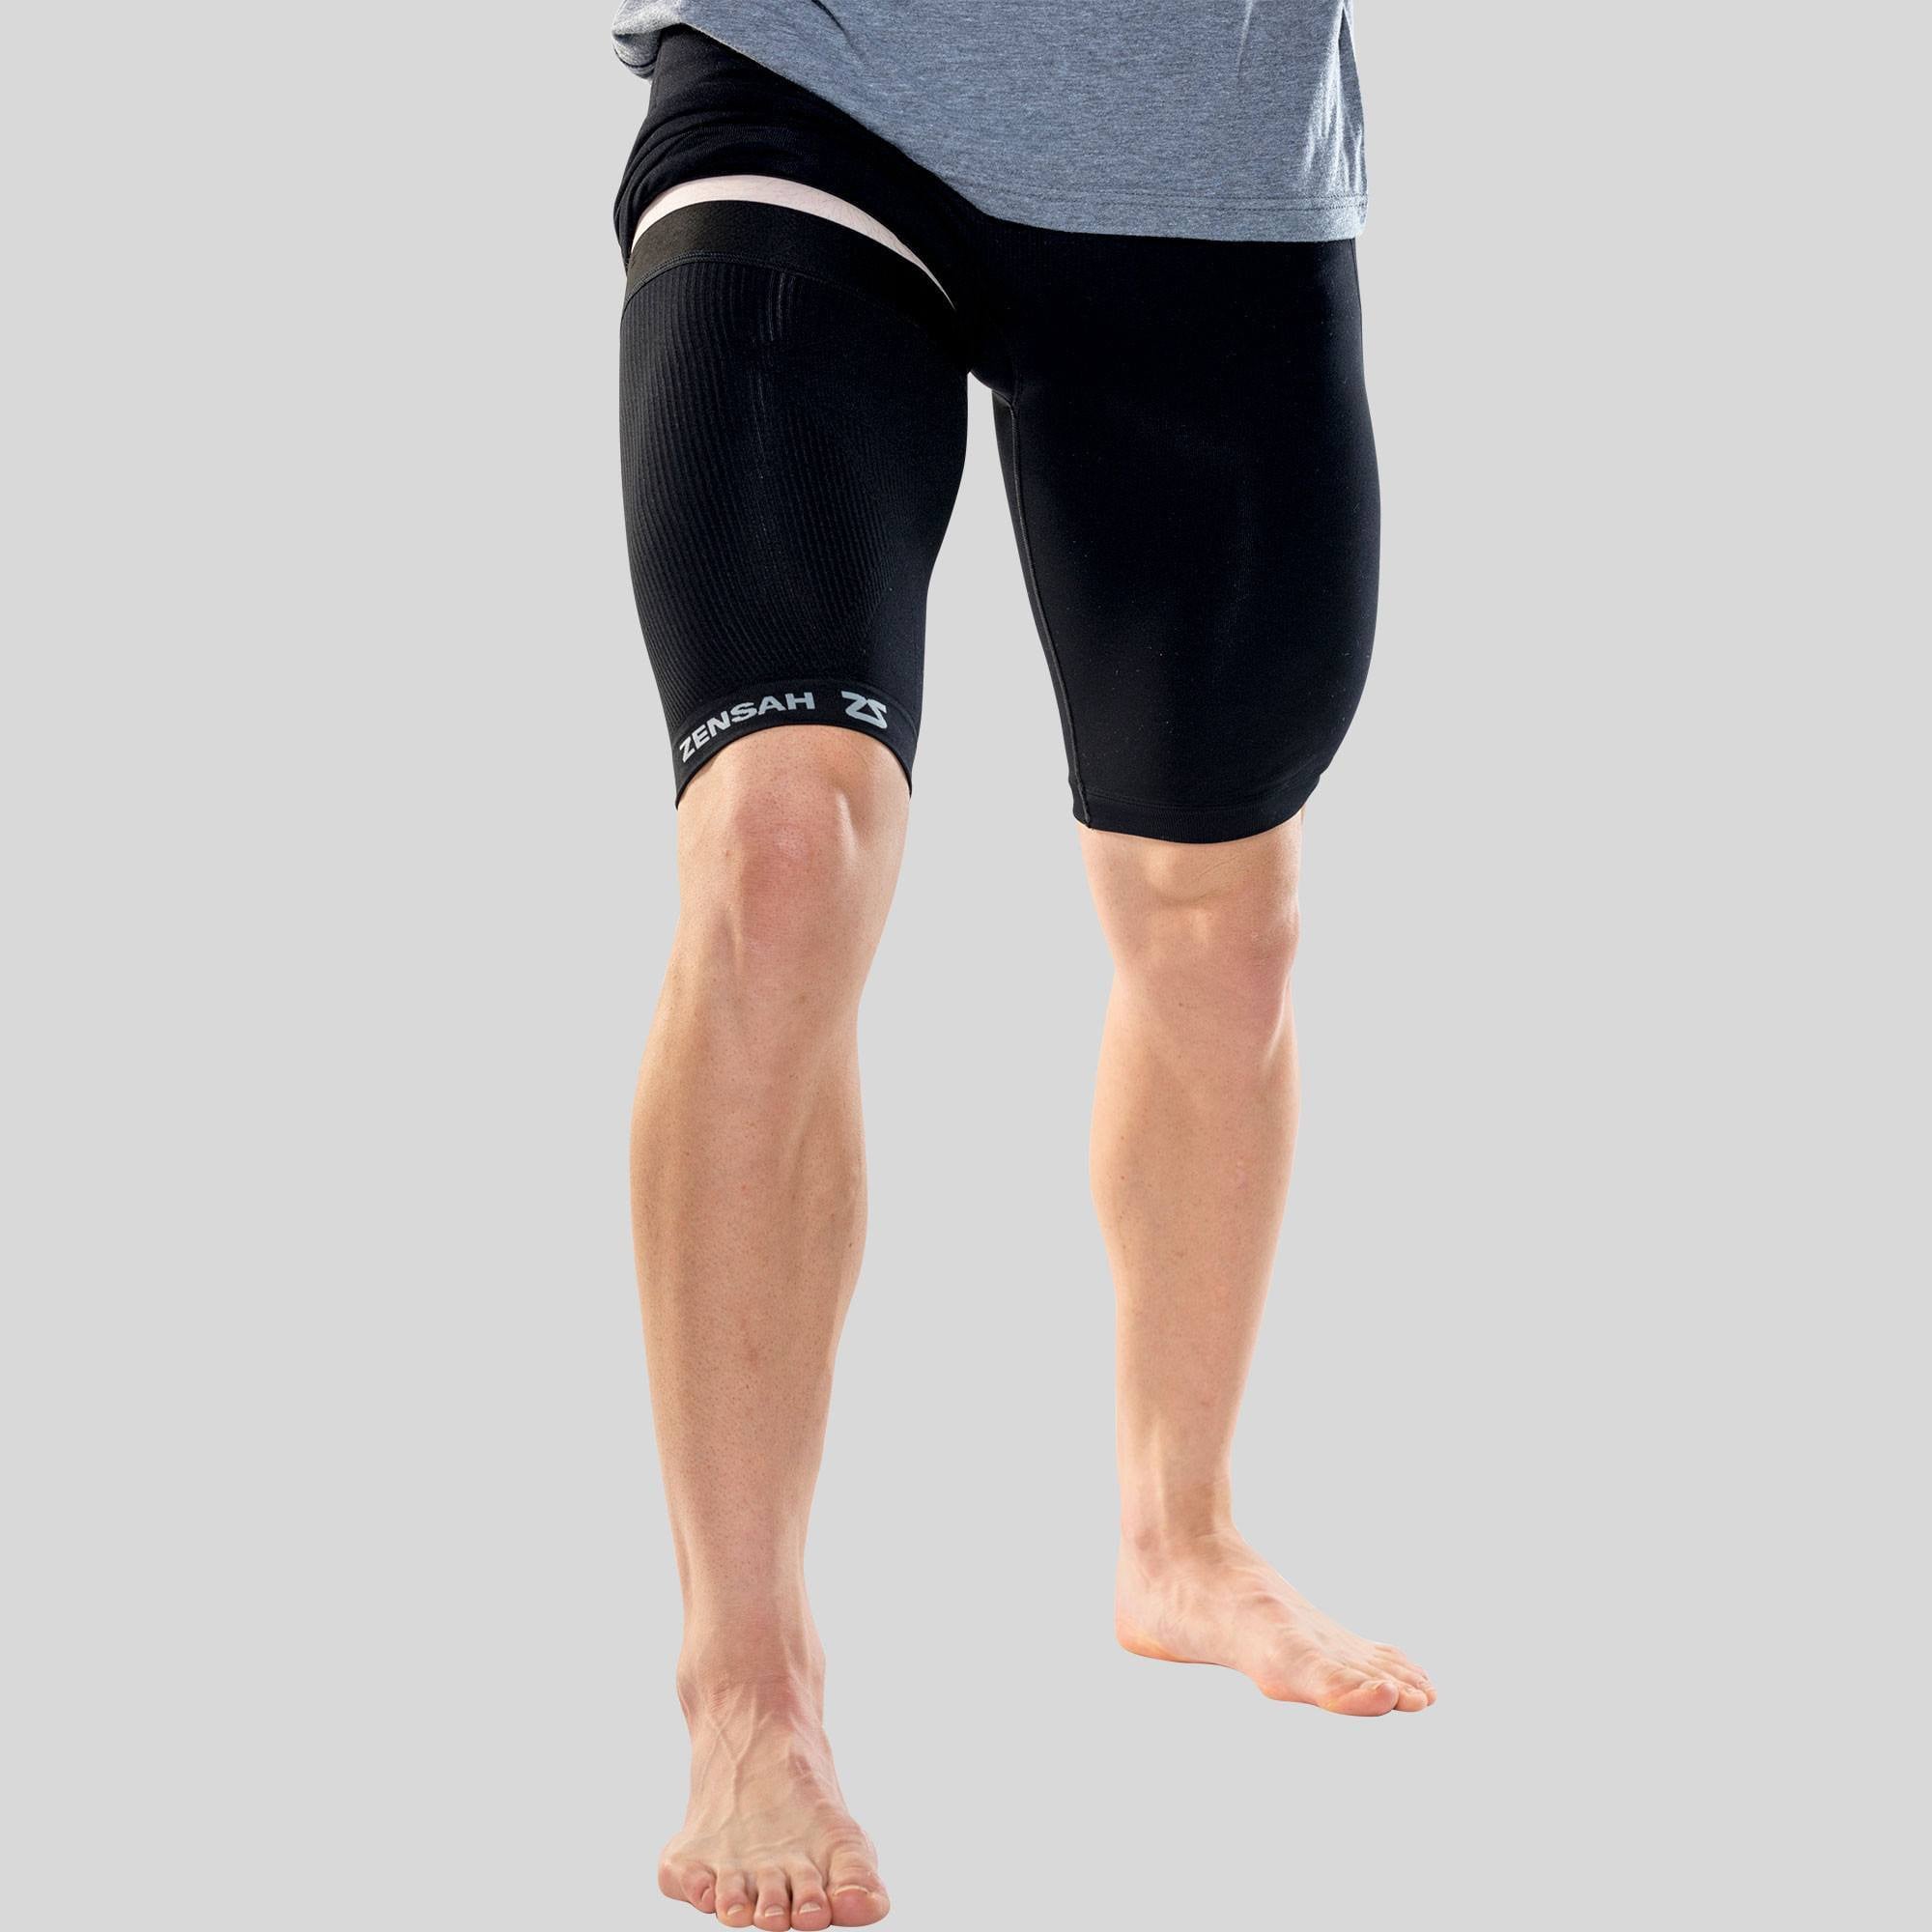 MoJo Sports Recovery Compression Thigh Sleeve - Treat Hamstring